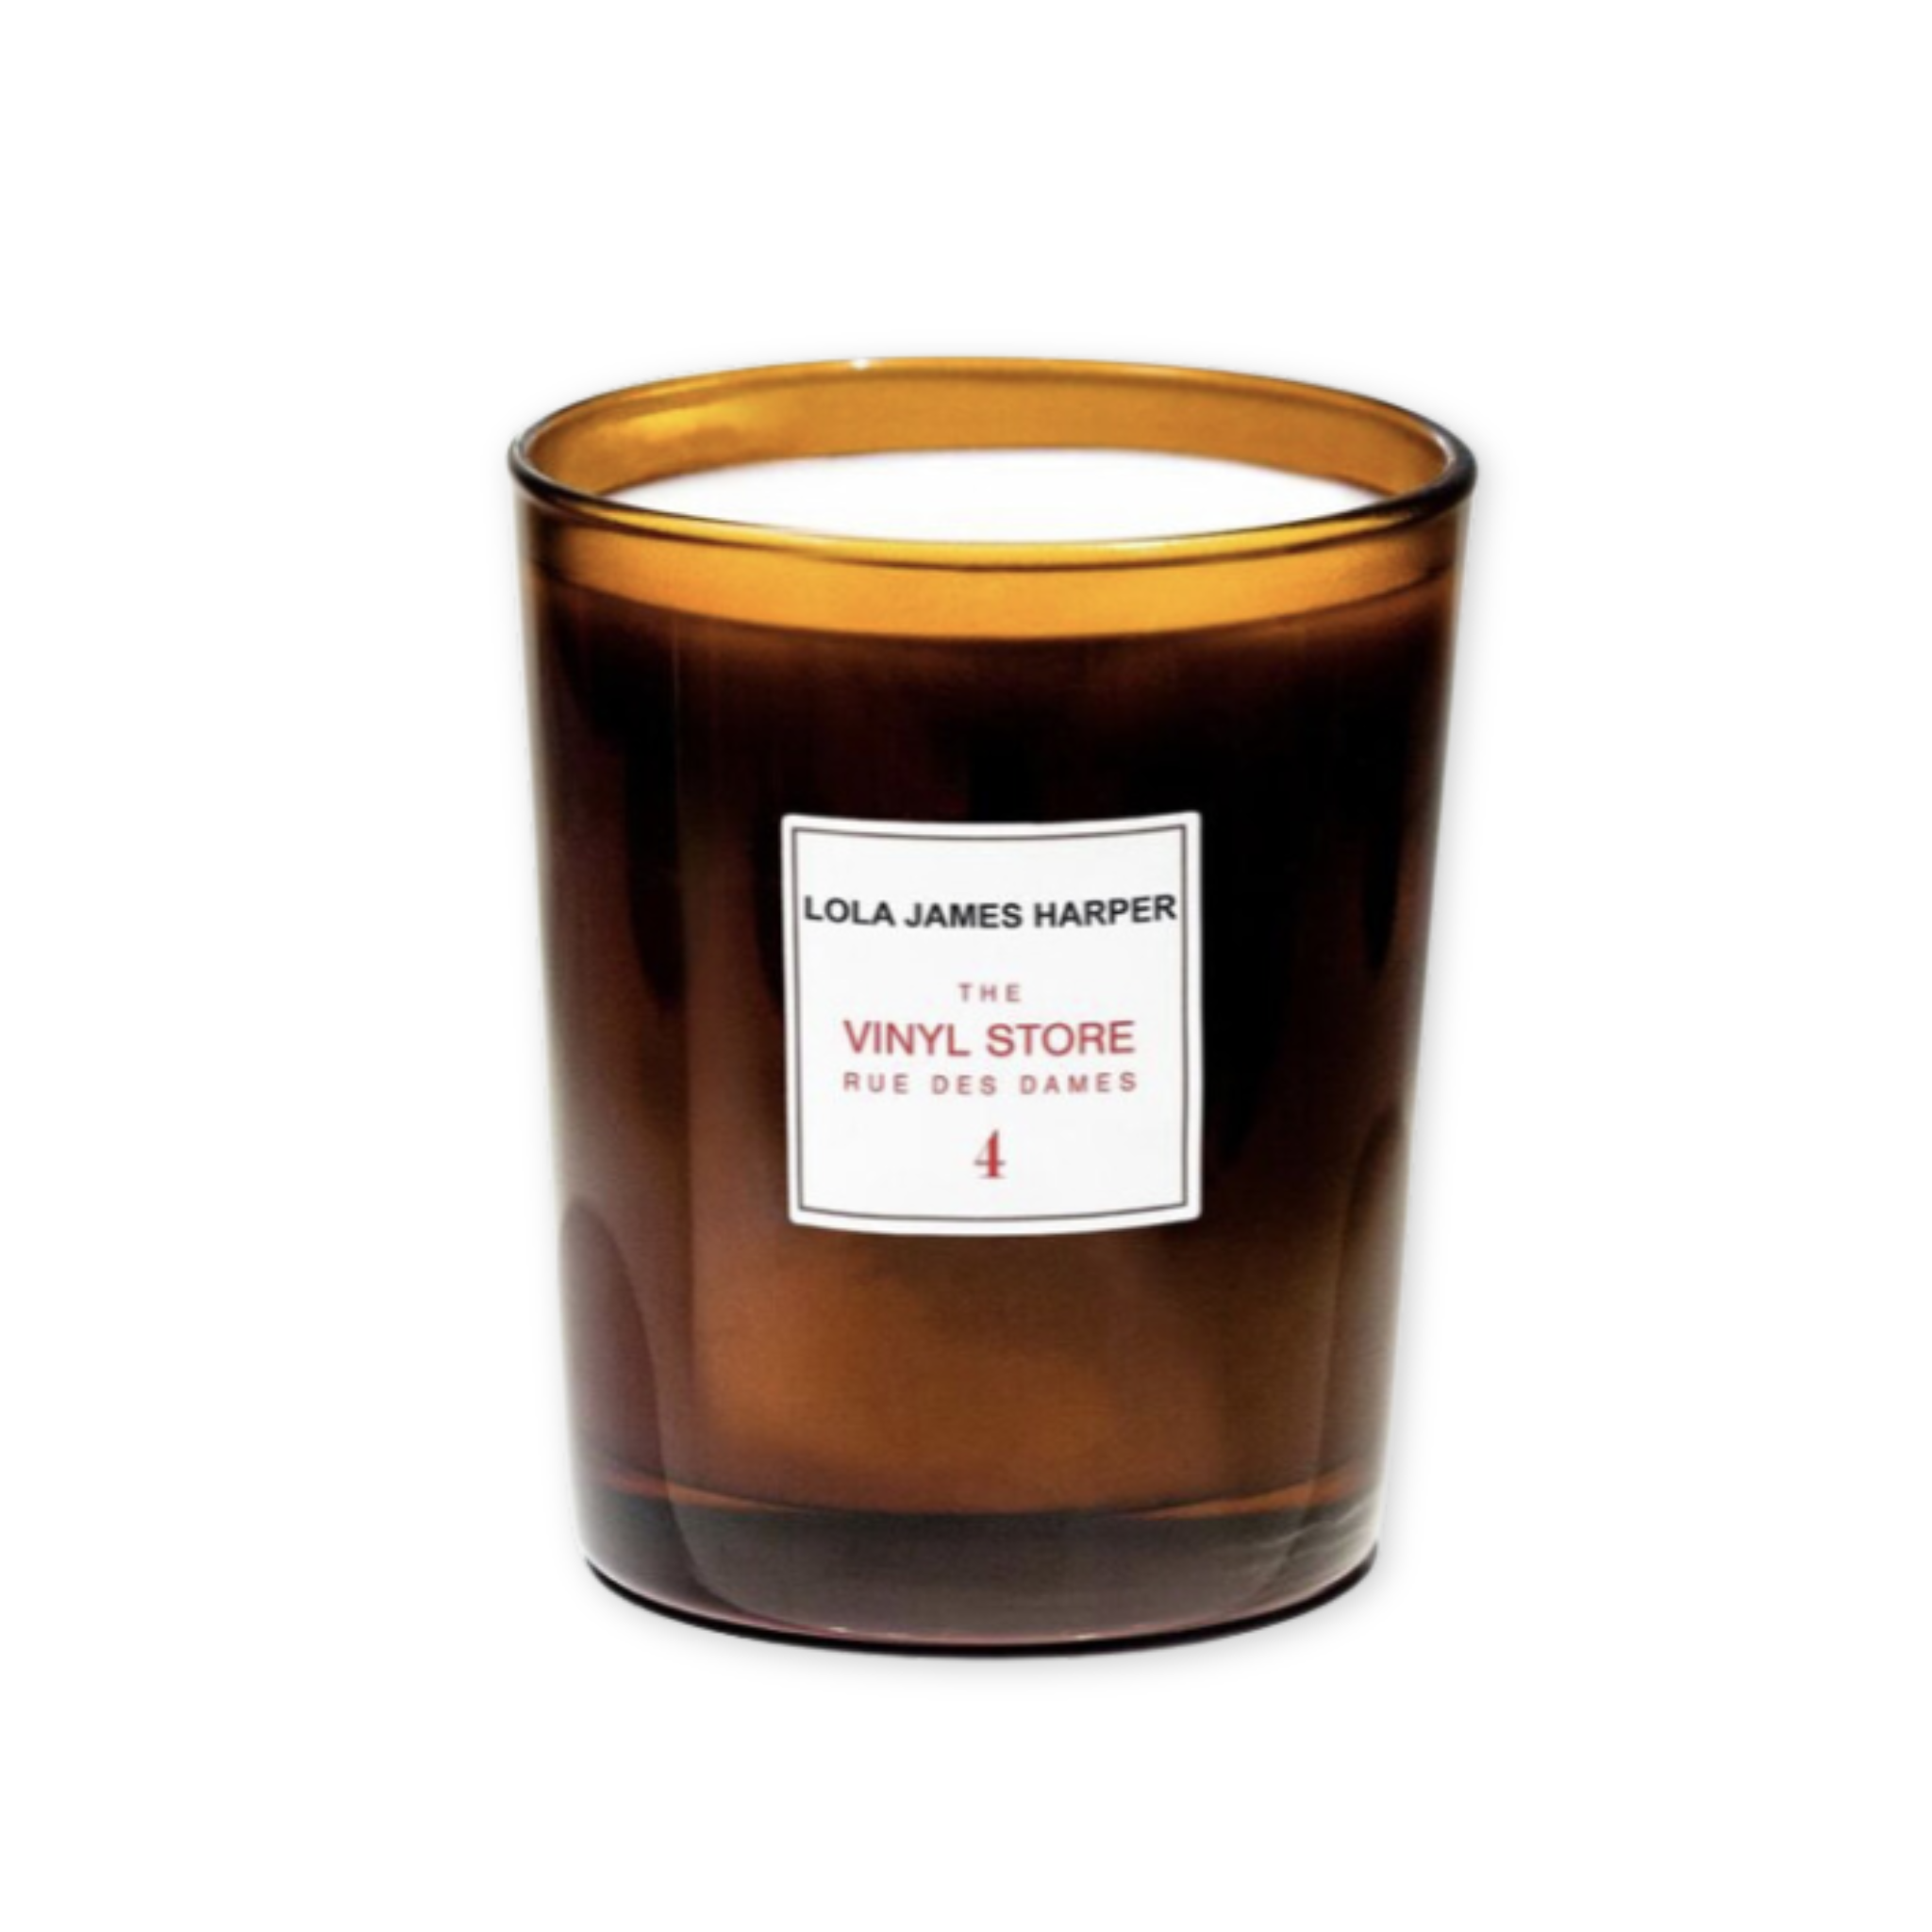 papyrus and poplar wood scented candle